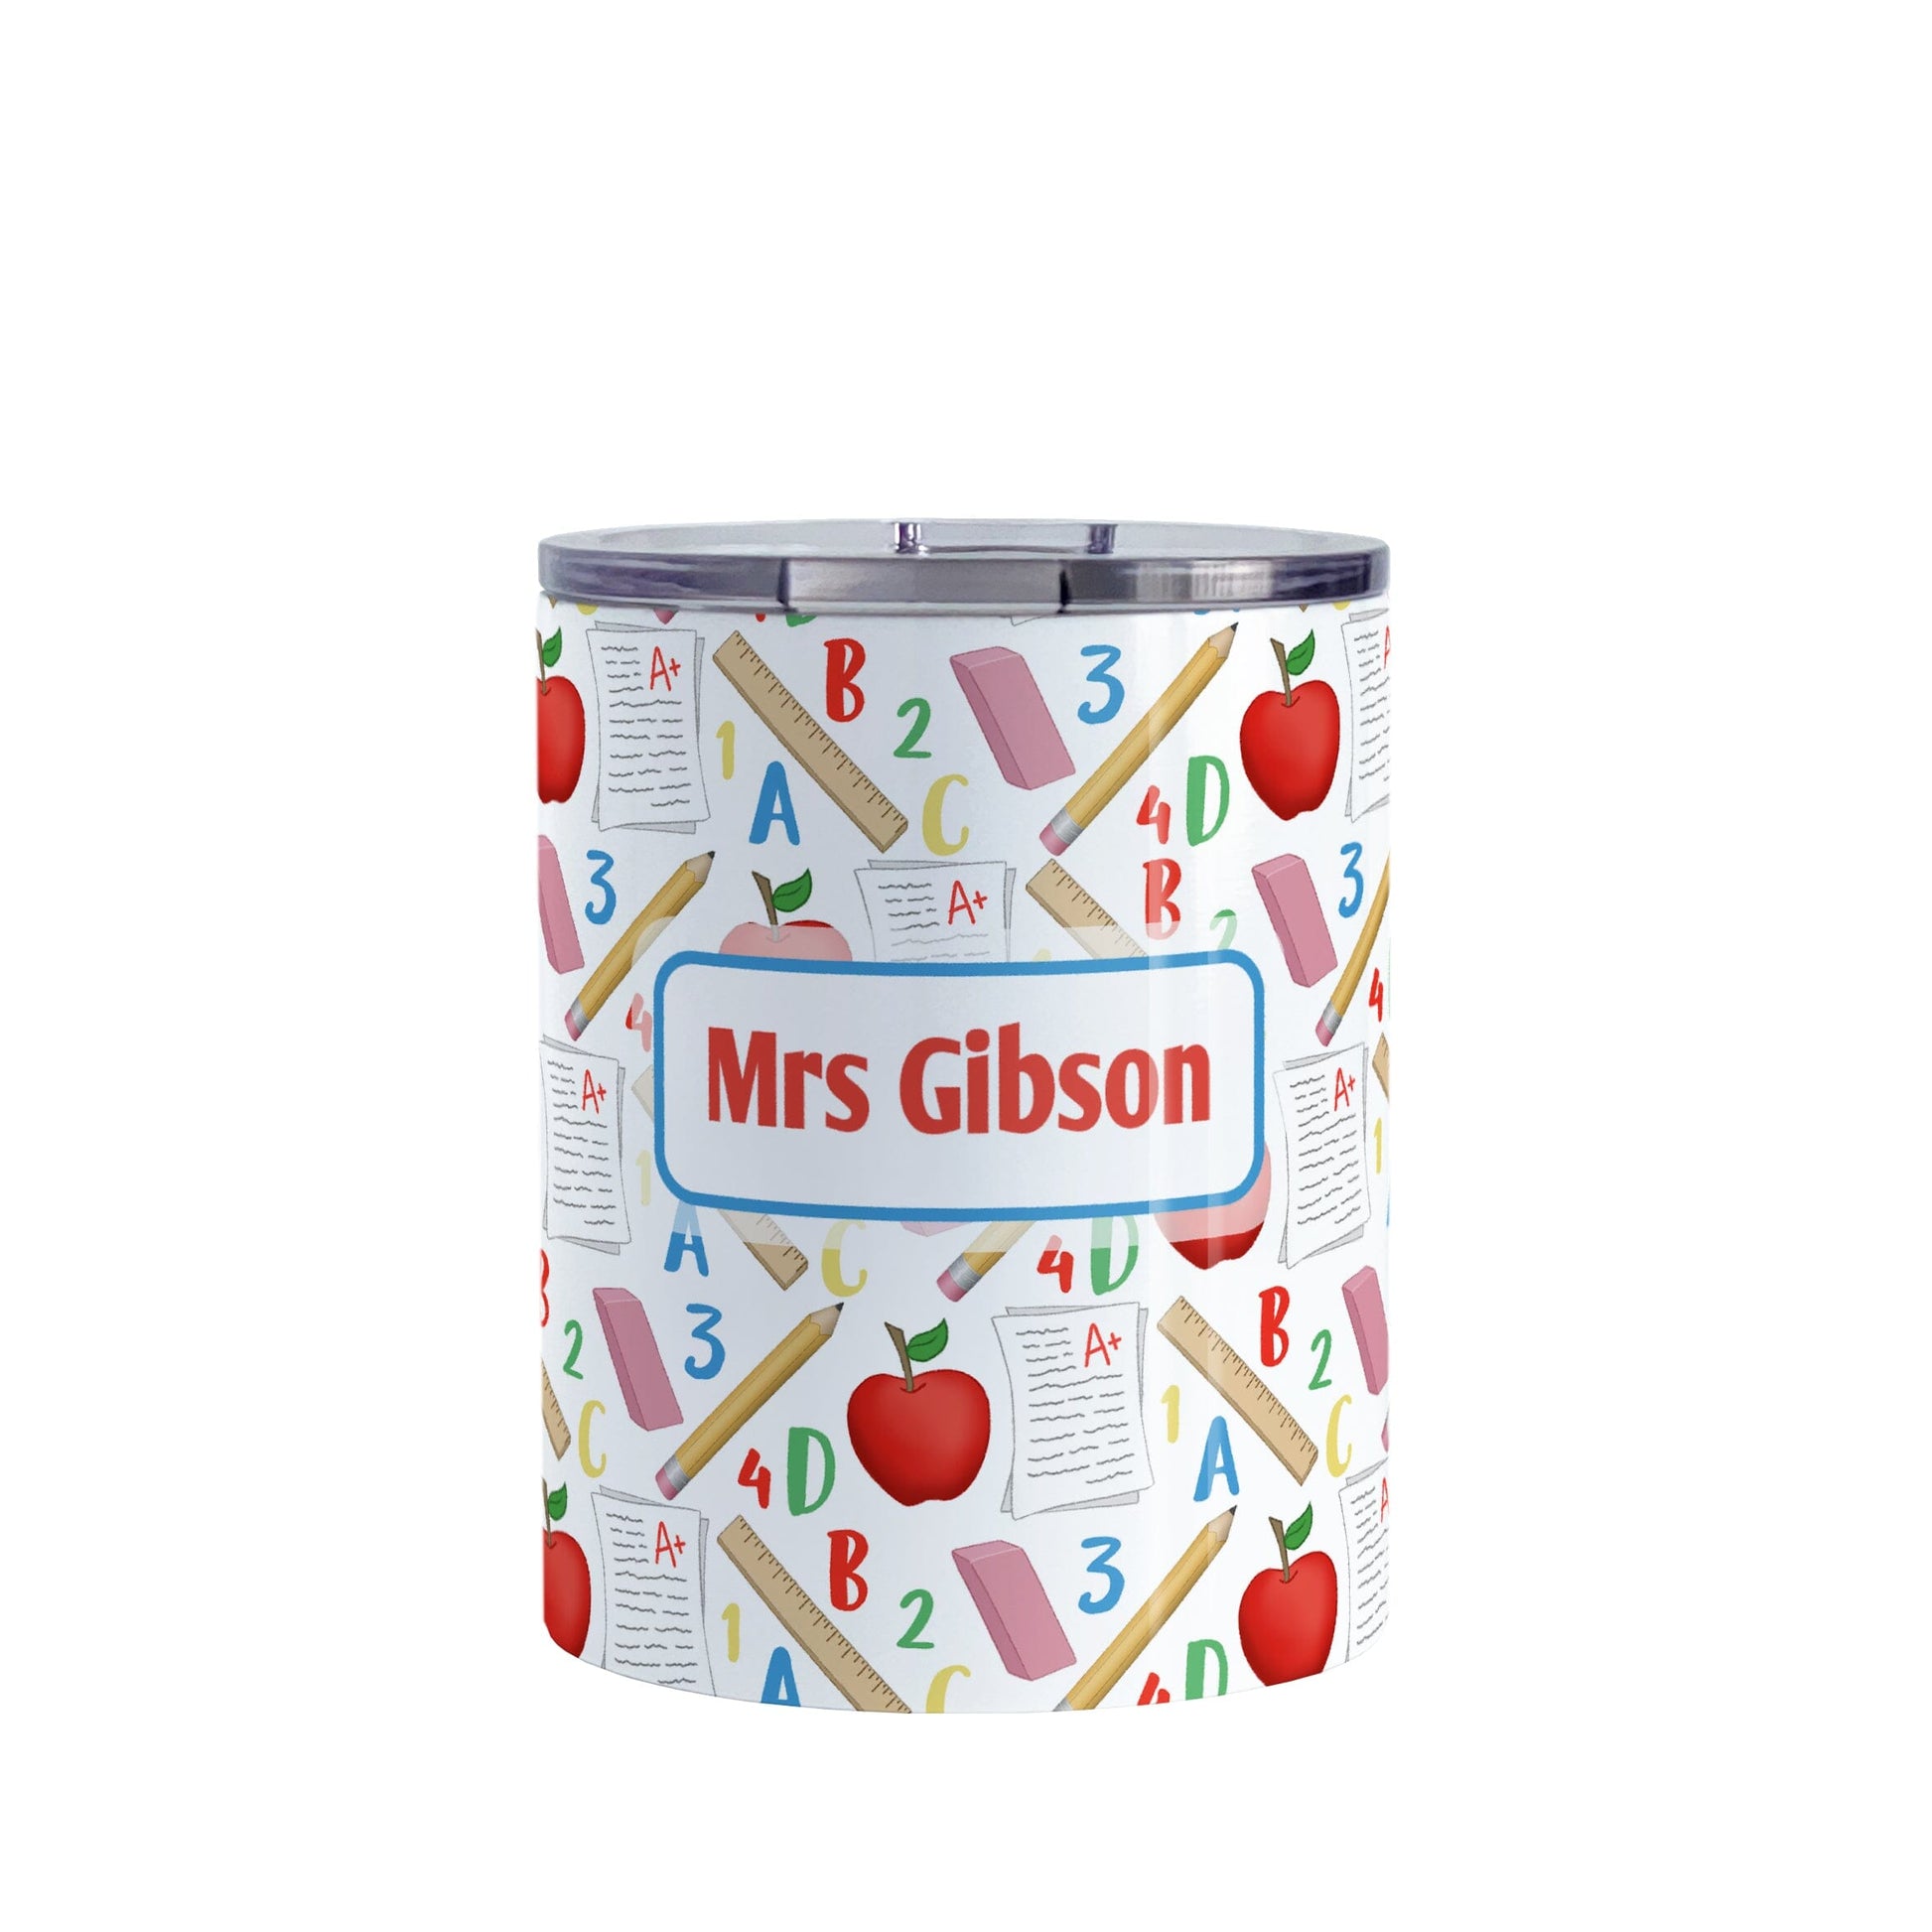 Personalized School Pattern Tumbler Cup (10oz) at Amy's Coffee Mugs. A stainless steel tumbler cup designed with a school-themed pattern with apples, rulers, erasers, graded papers, numbers, and letters that wraps around the cup. Your personalized name or your teacher's name is custom printed in red over the school pattern.